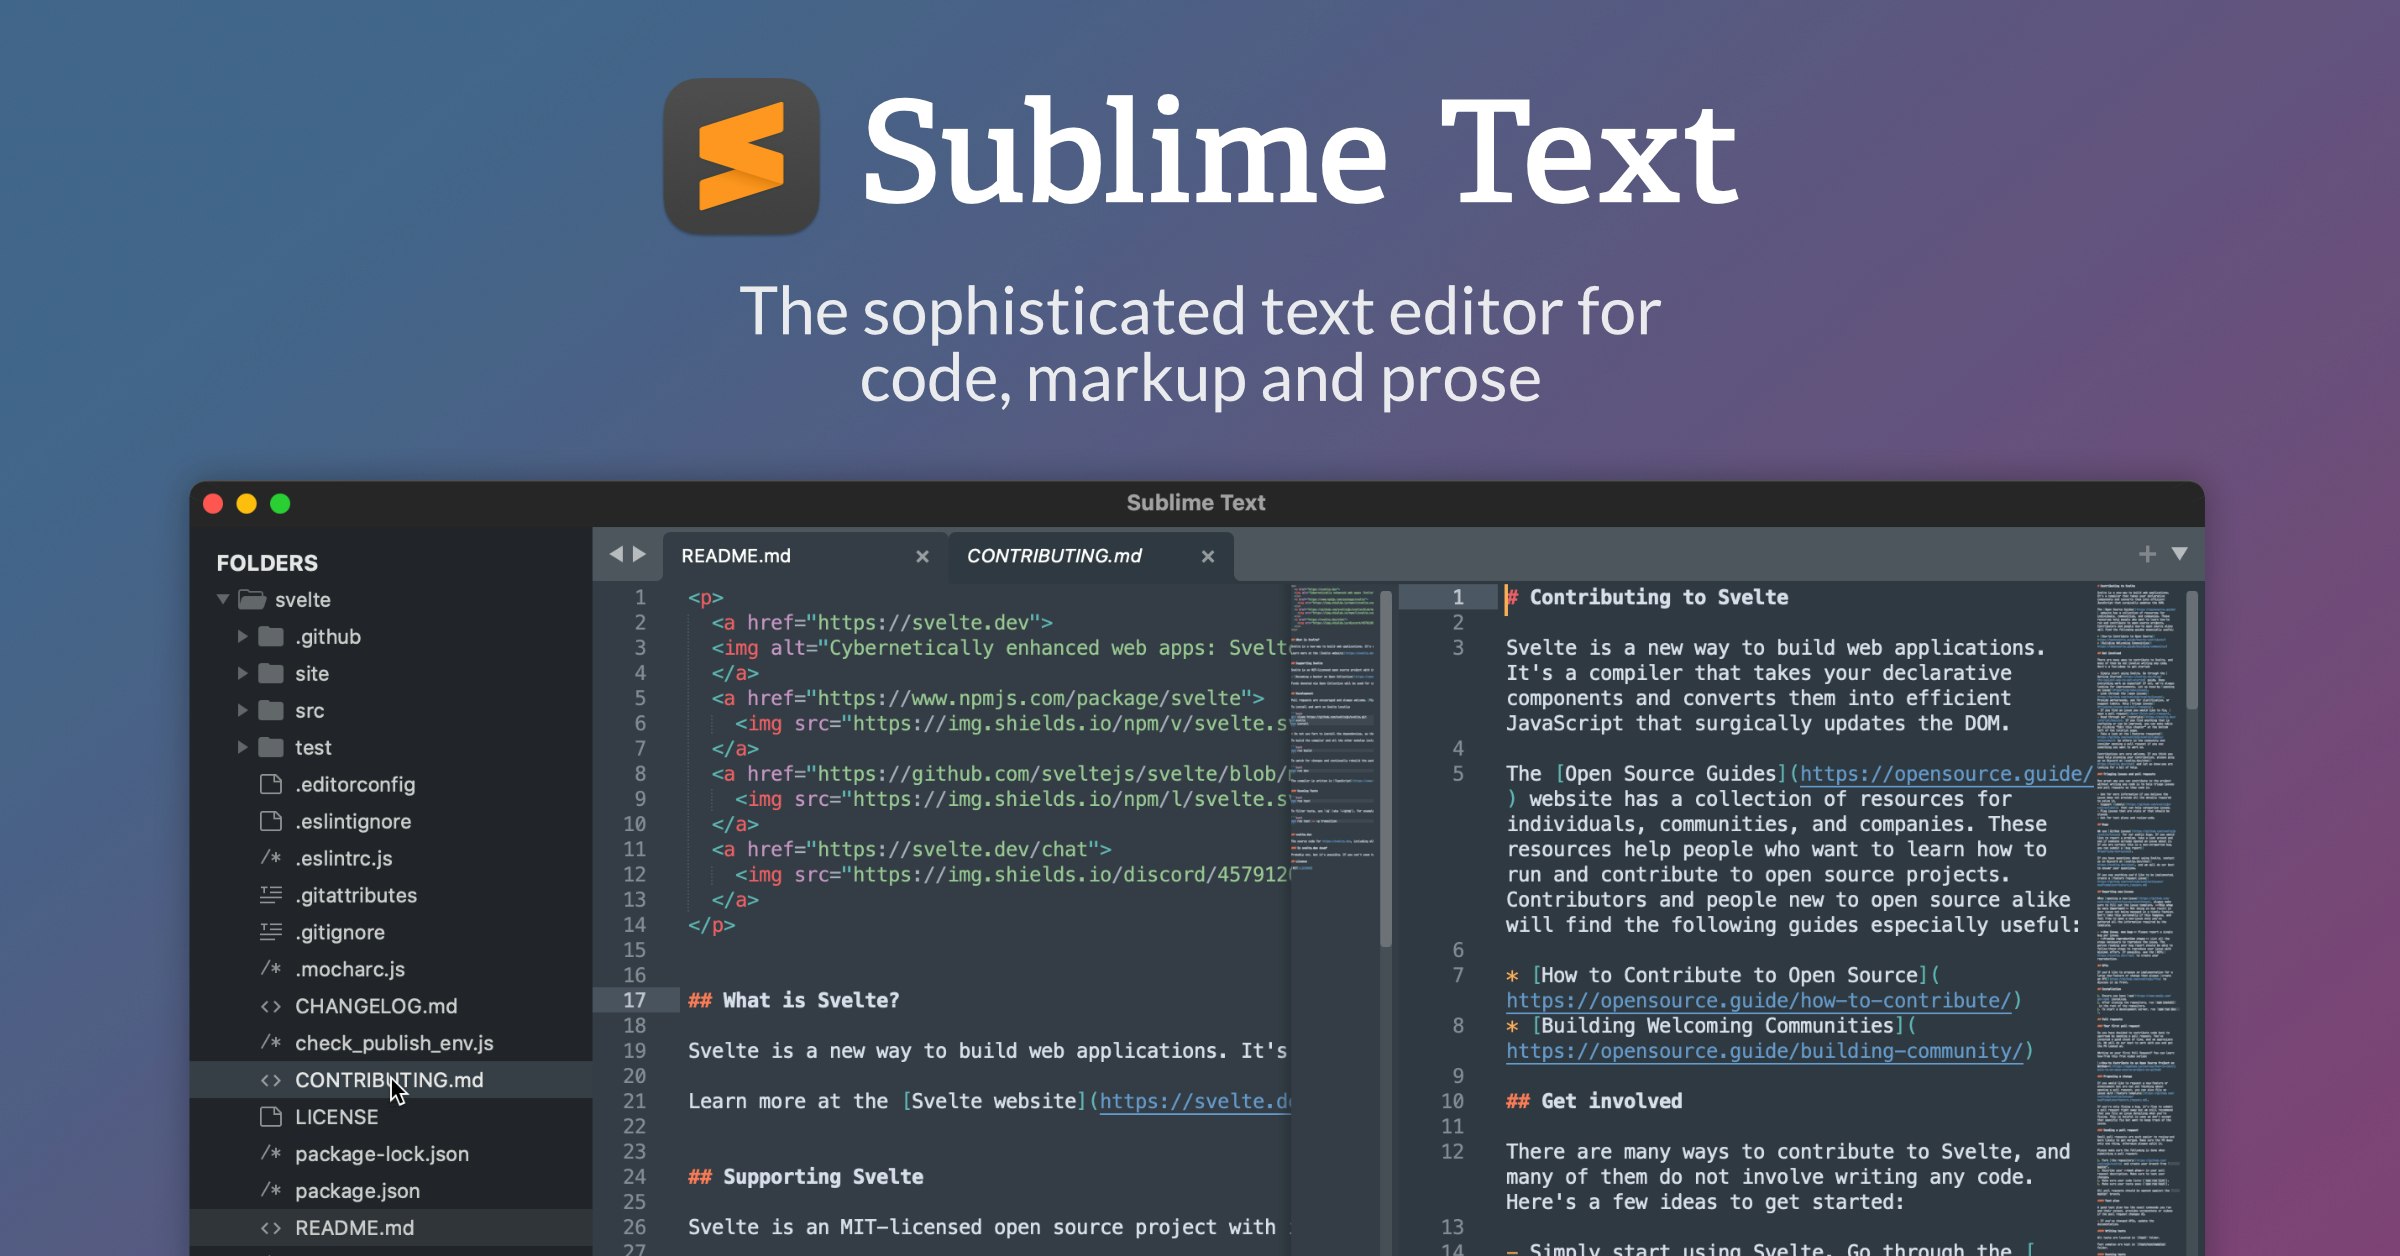 download the last version for apple Sublime Text 4.4151